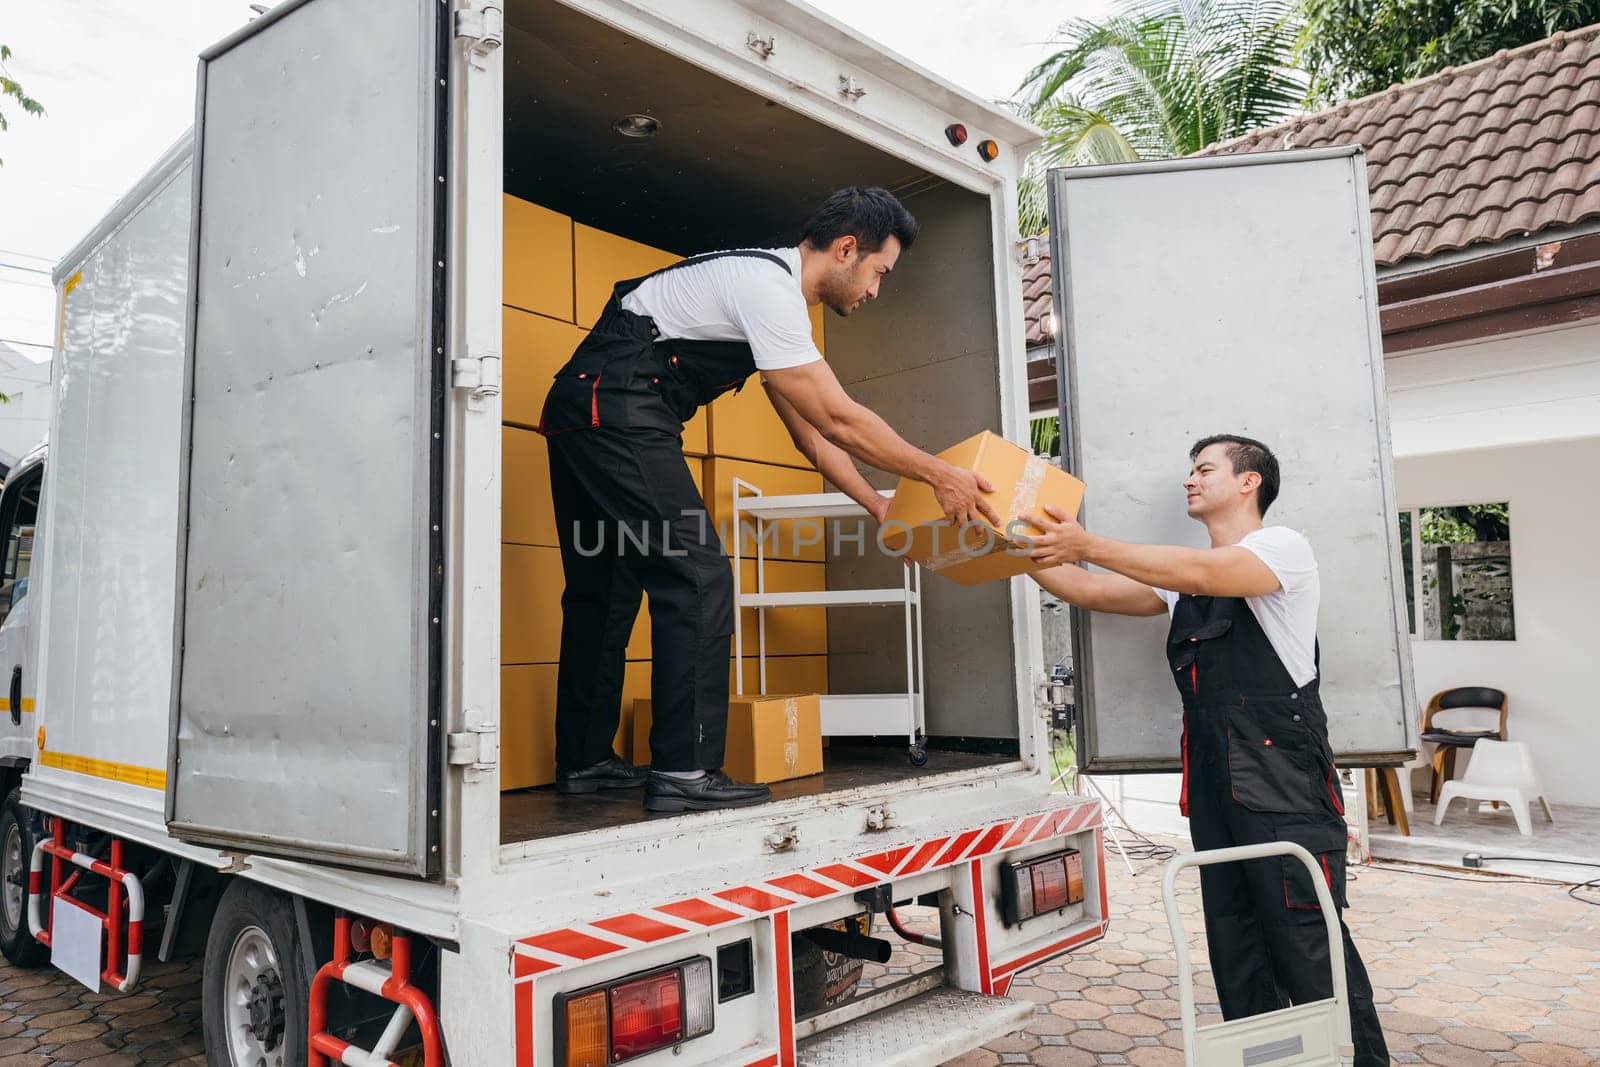 In uniform employees work together to unload boxes from the moving truck for customer relocation. The company dedication ensures a happy move. Moving Day by Sorapop